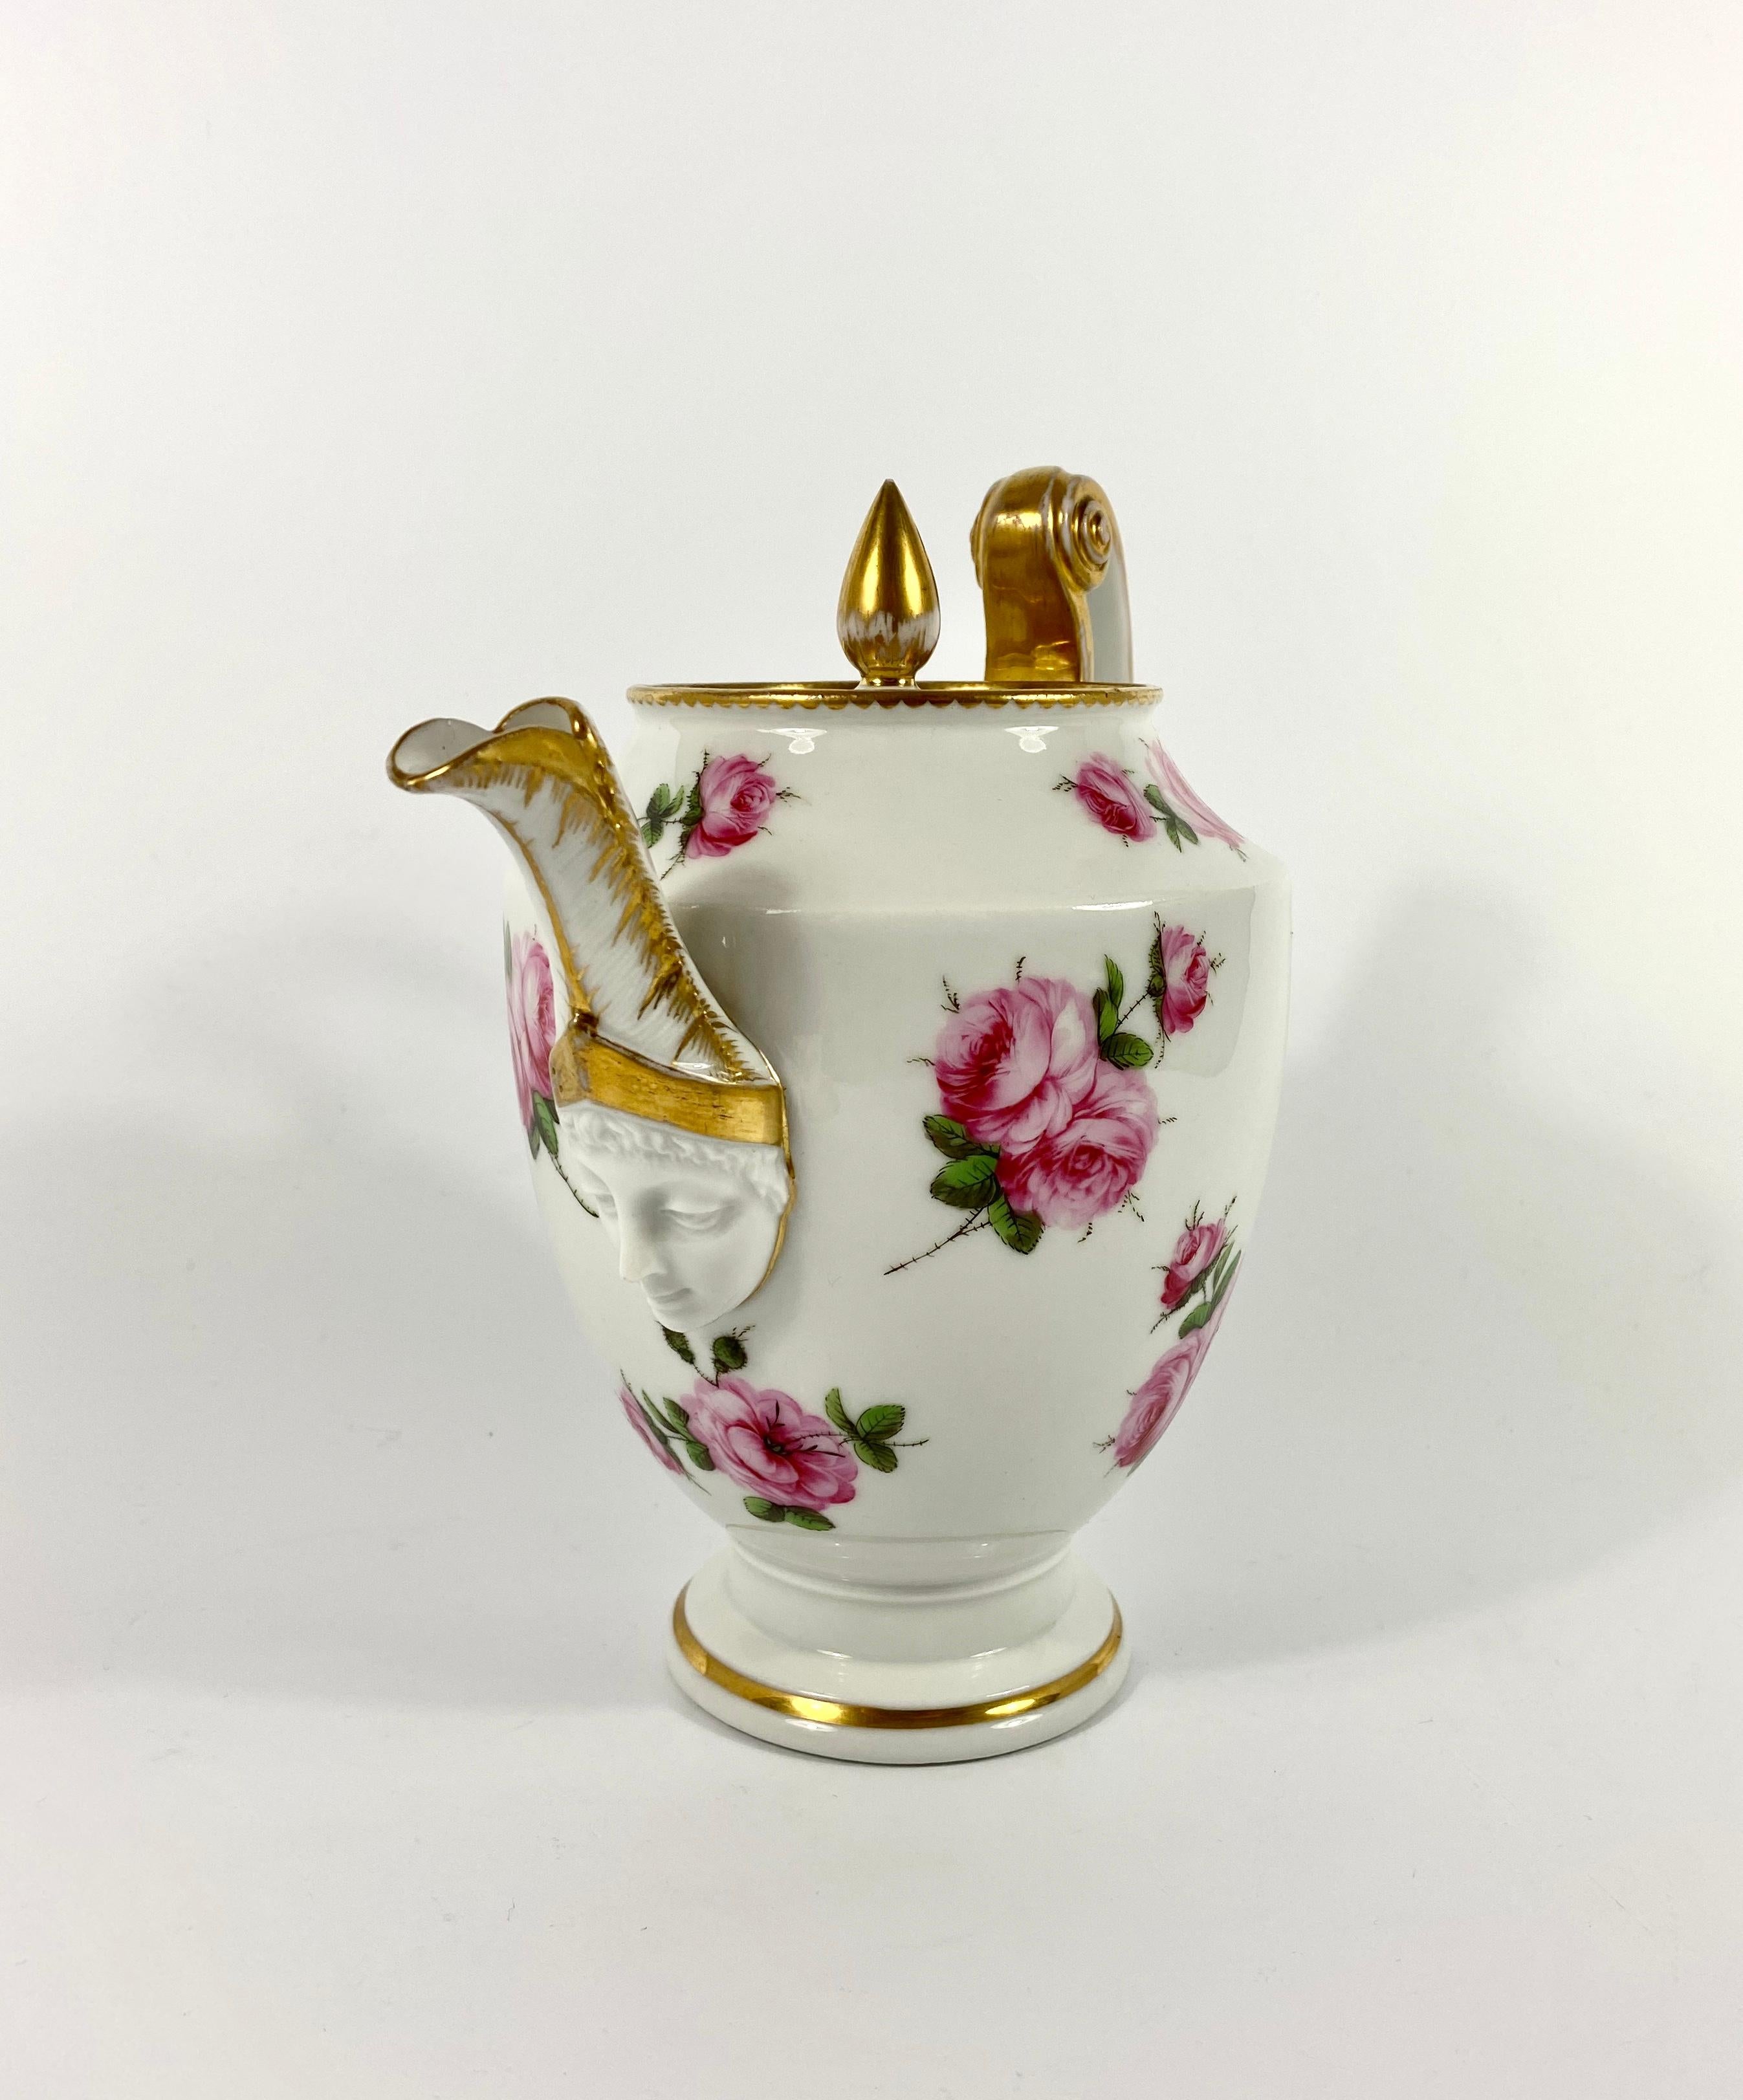 £690.00
Fine Paris porcelain ‘Empire’ coffee pot, circa 1820. Possibly decorated in London with beautifully hand painted sprays of roses to the body, and the cover. The moulded scroll shaped handle, terminating in a stylized acanthus leaf motif,